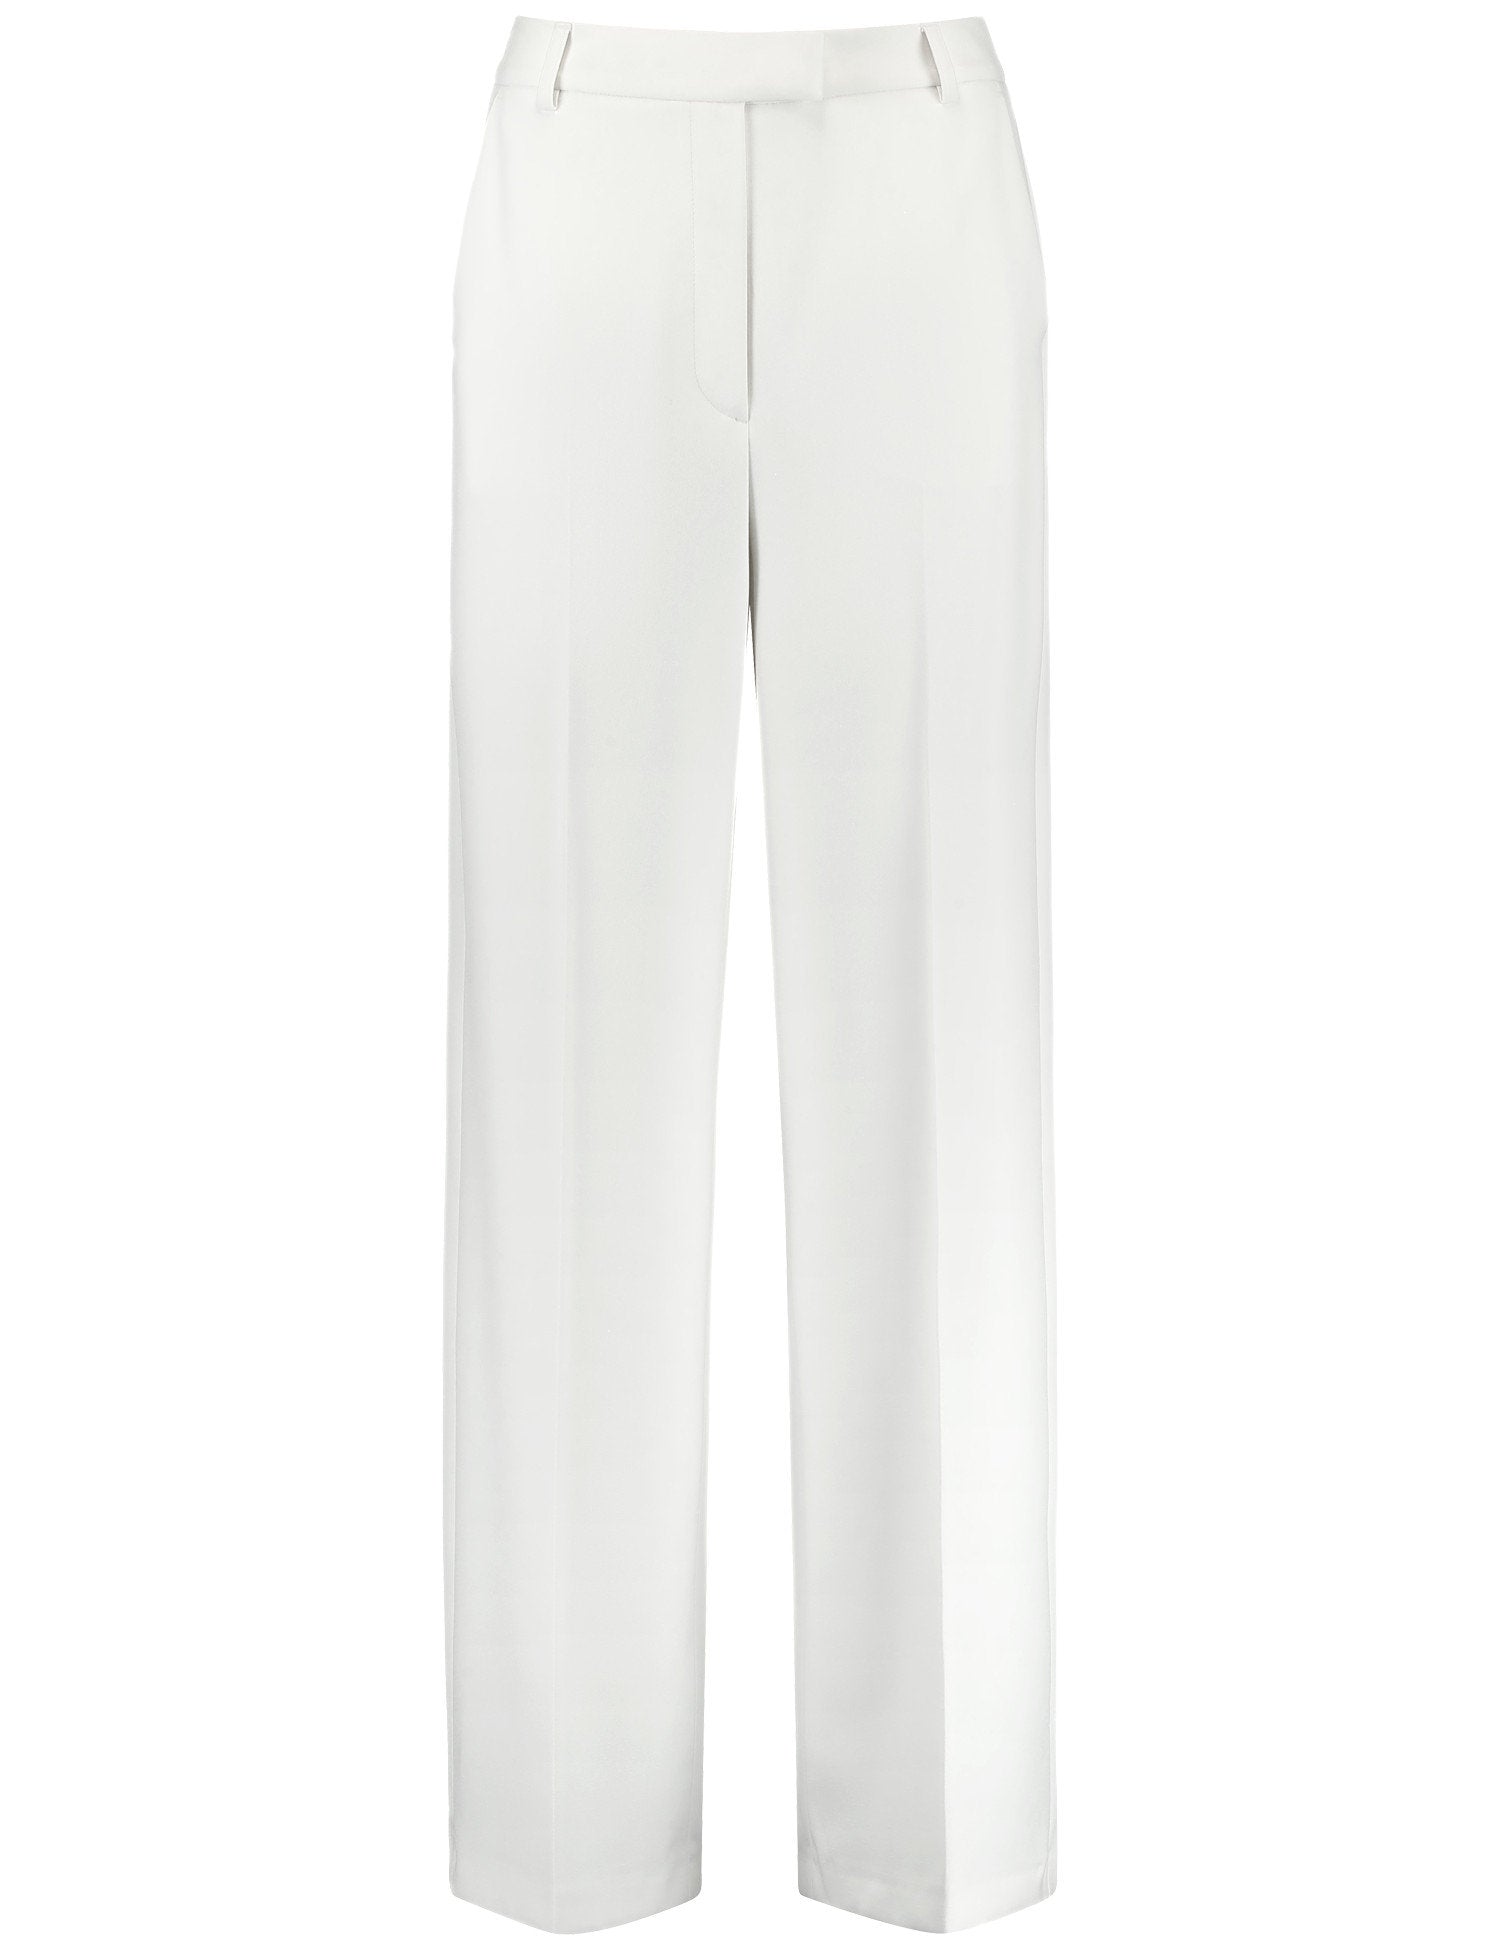 Elegant Trousers With A Wide Leg_520334-11081_9600_07